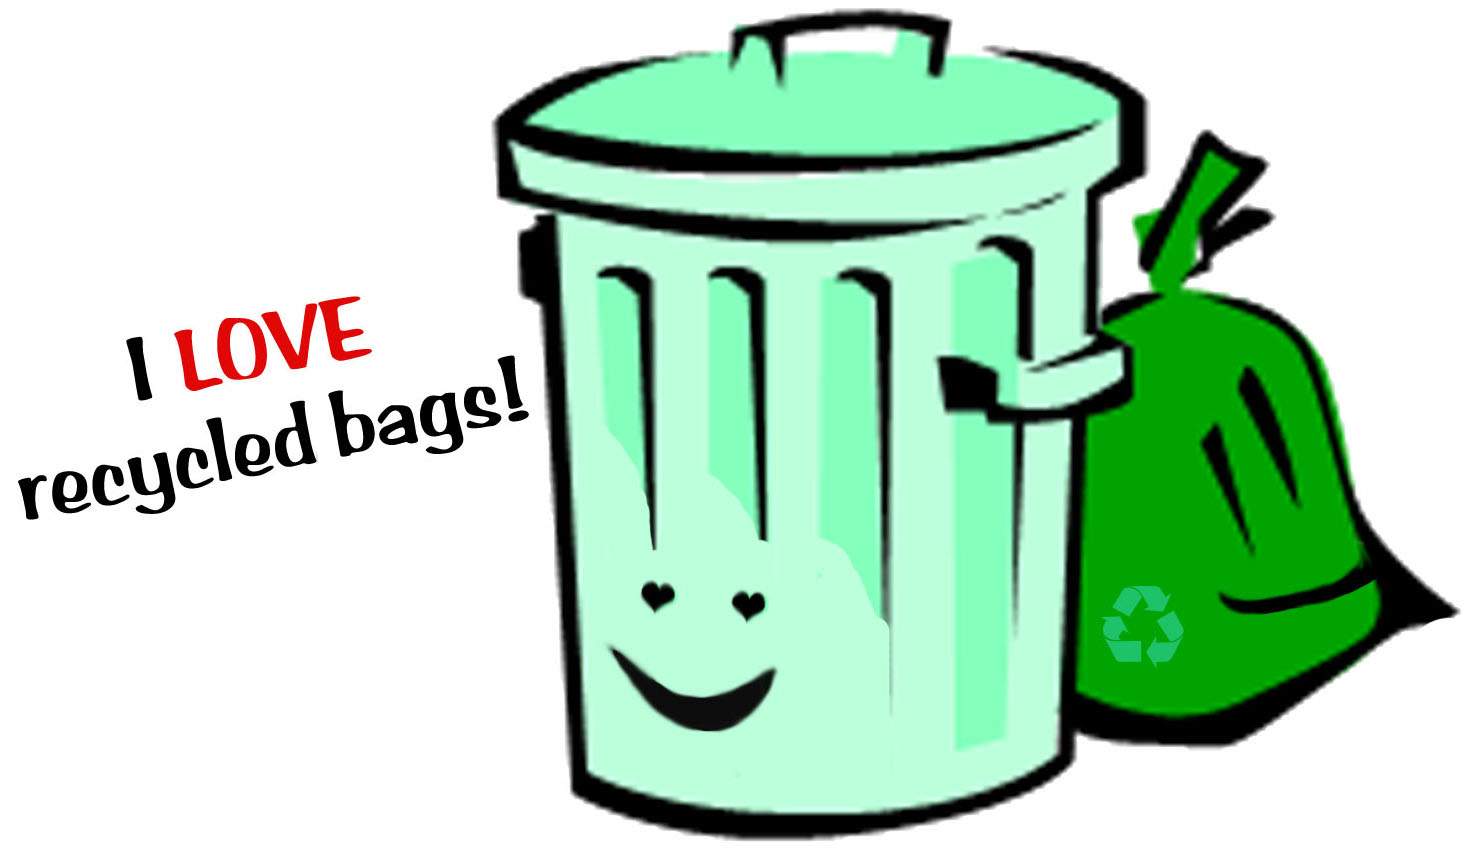 free clipart images trash can - photo #38